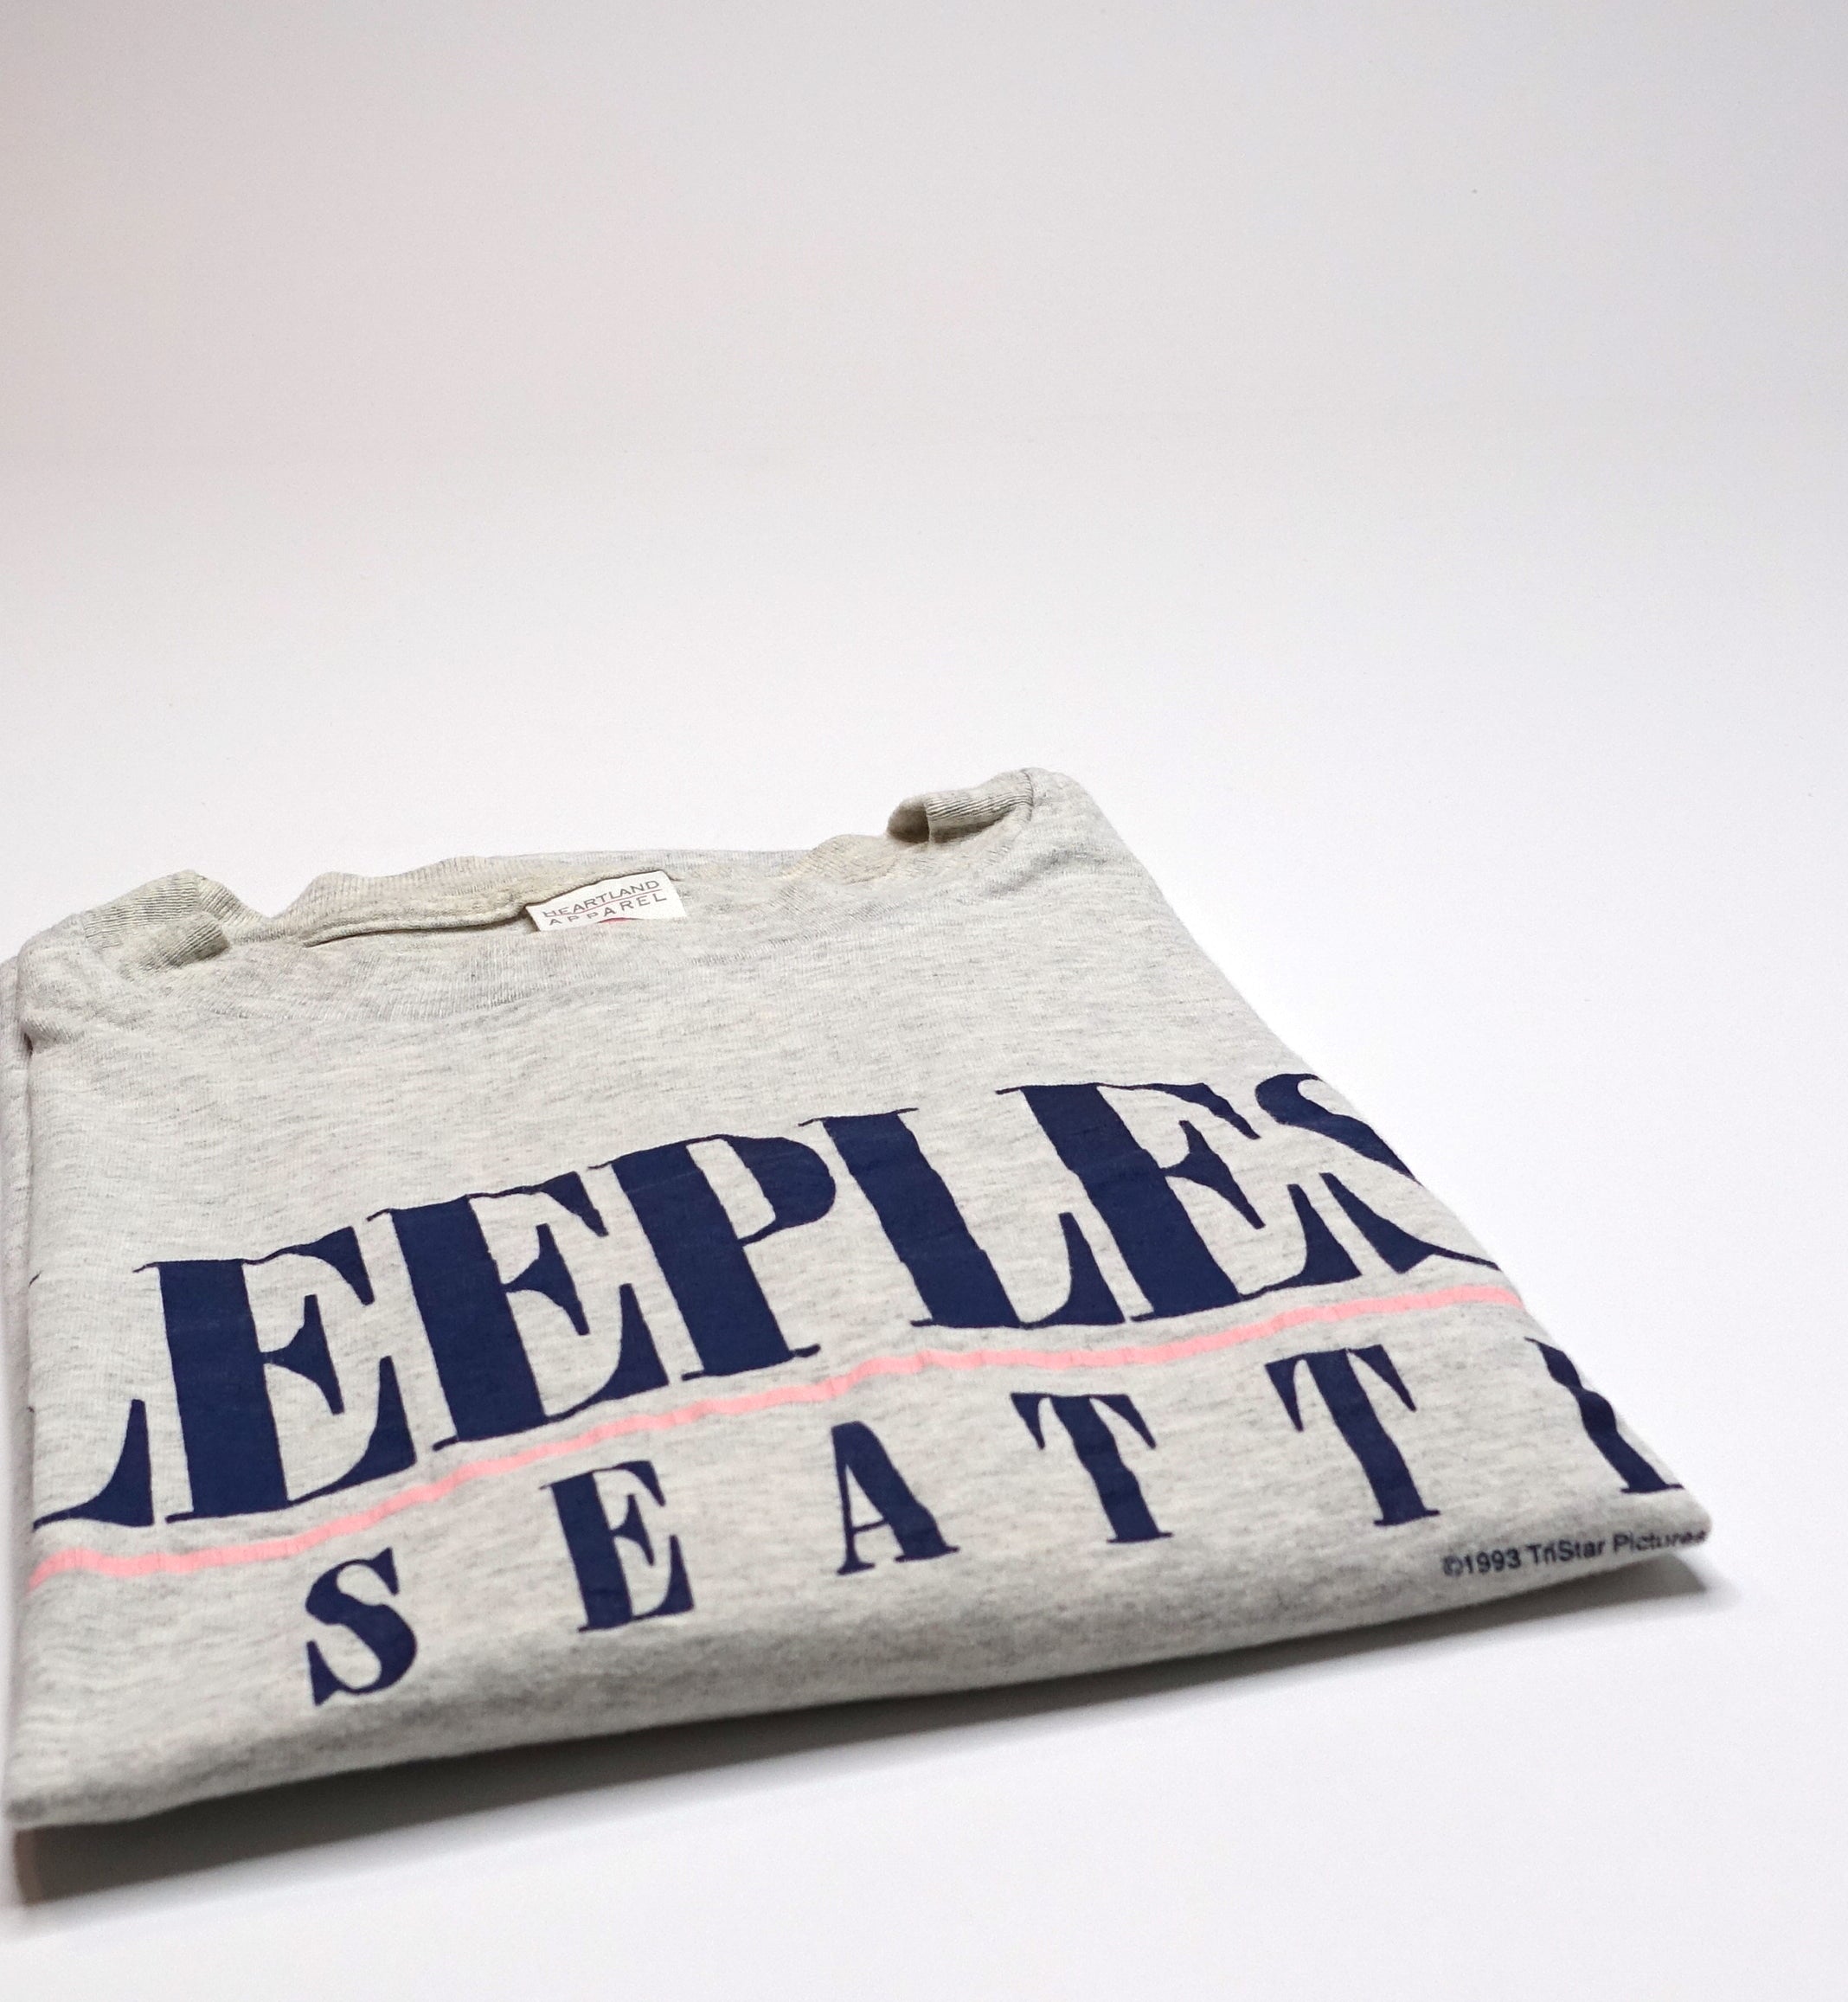 Sleepless In Seattle – Motion Picture Soundtrack 1993 Promo Shirt Size XL